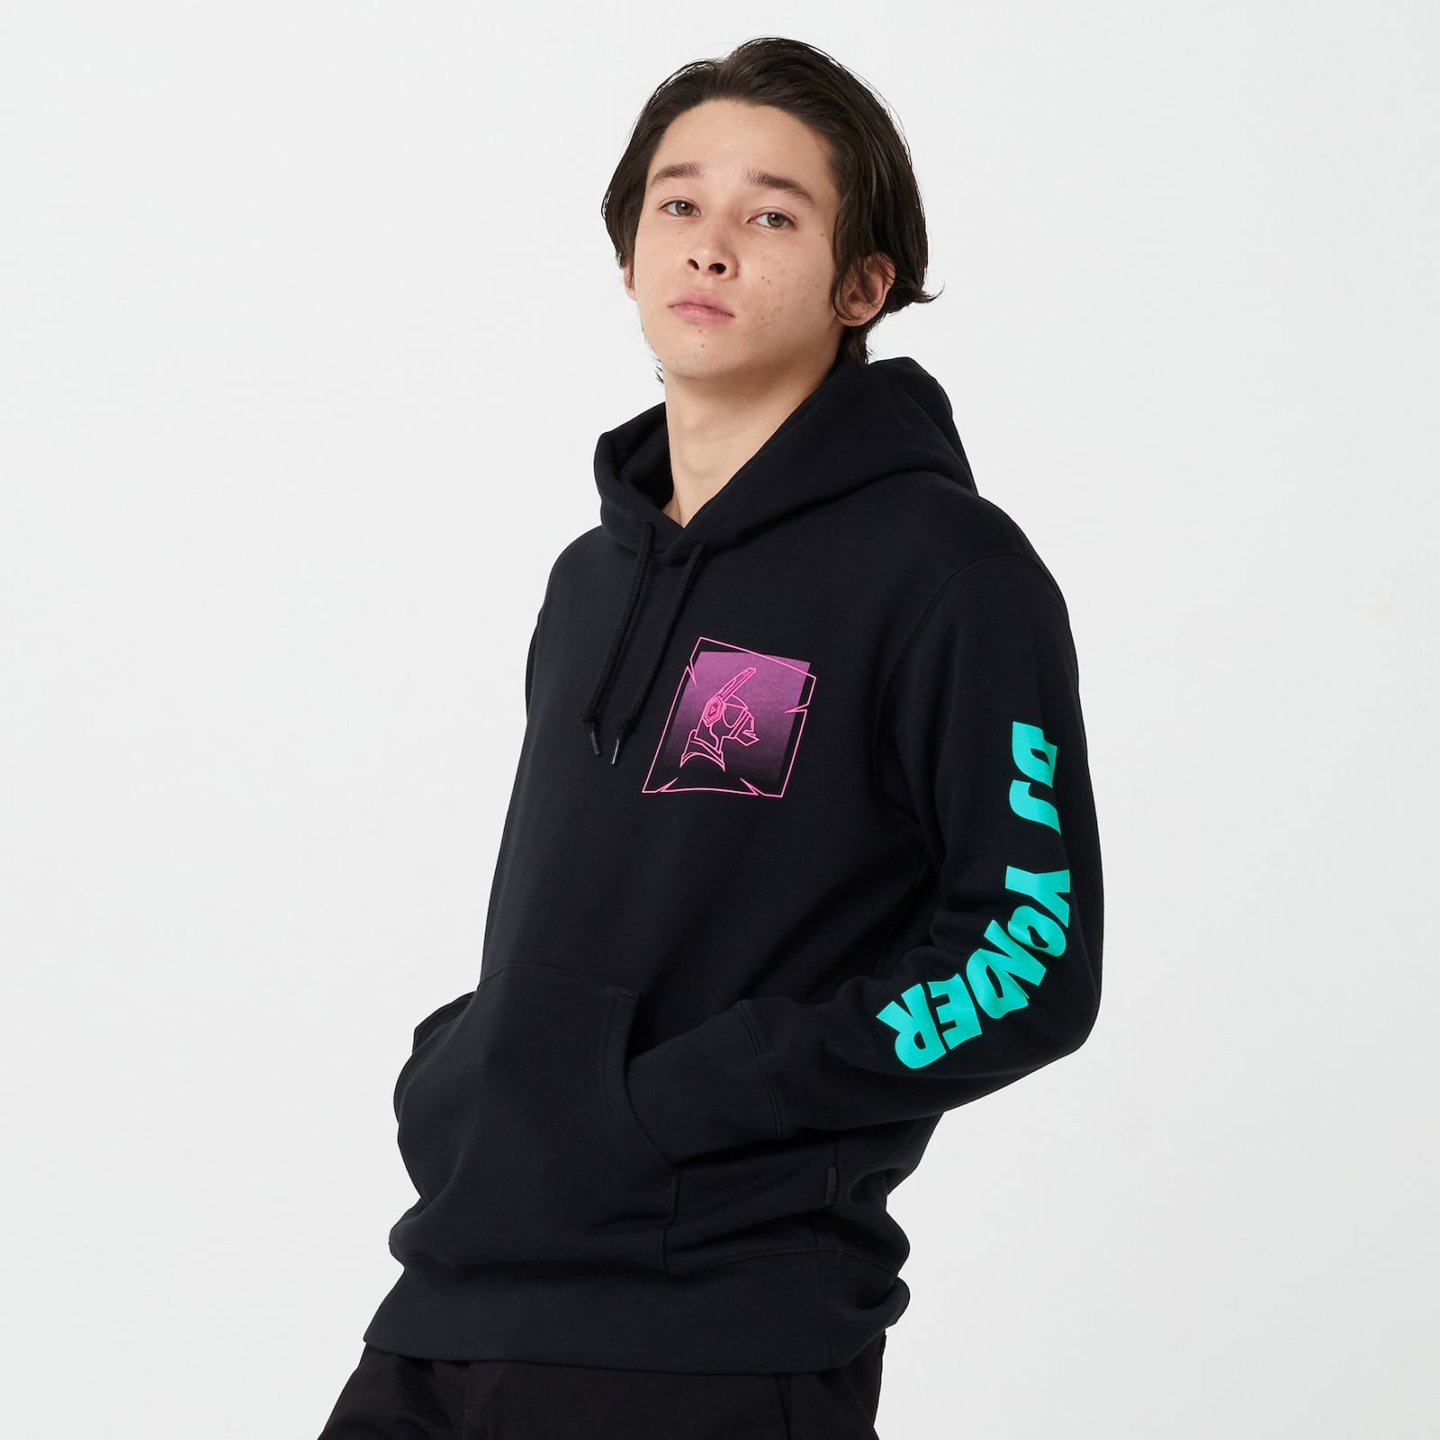 Fortnite x UNIQLO has arrived in Canada - Cult MTL